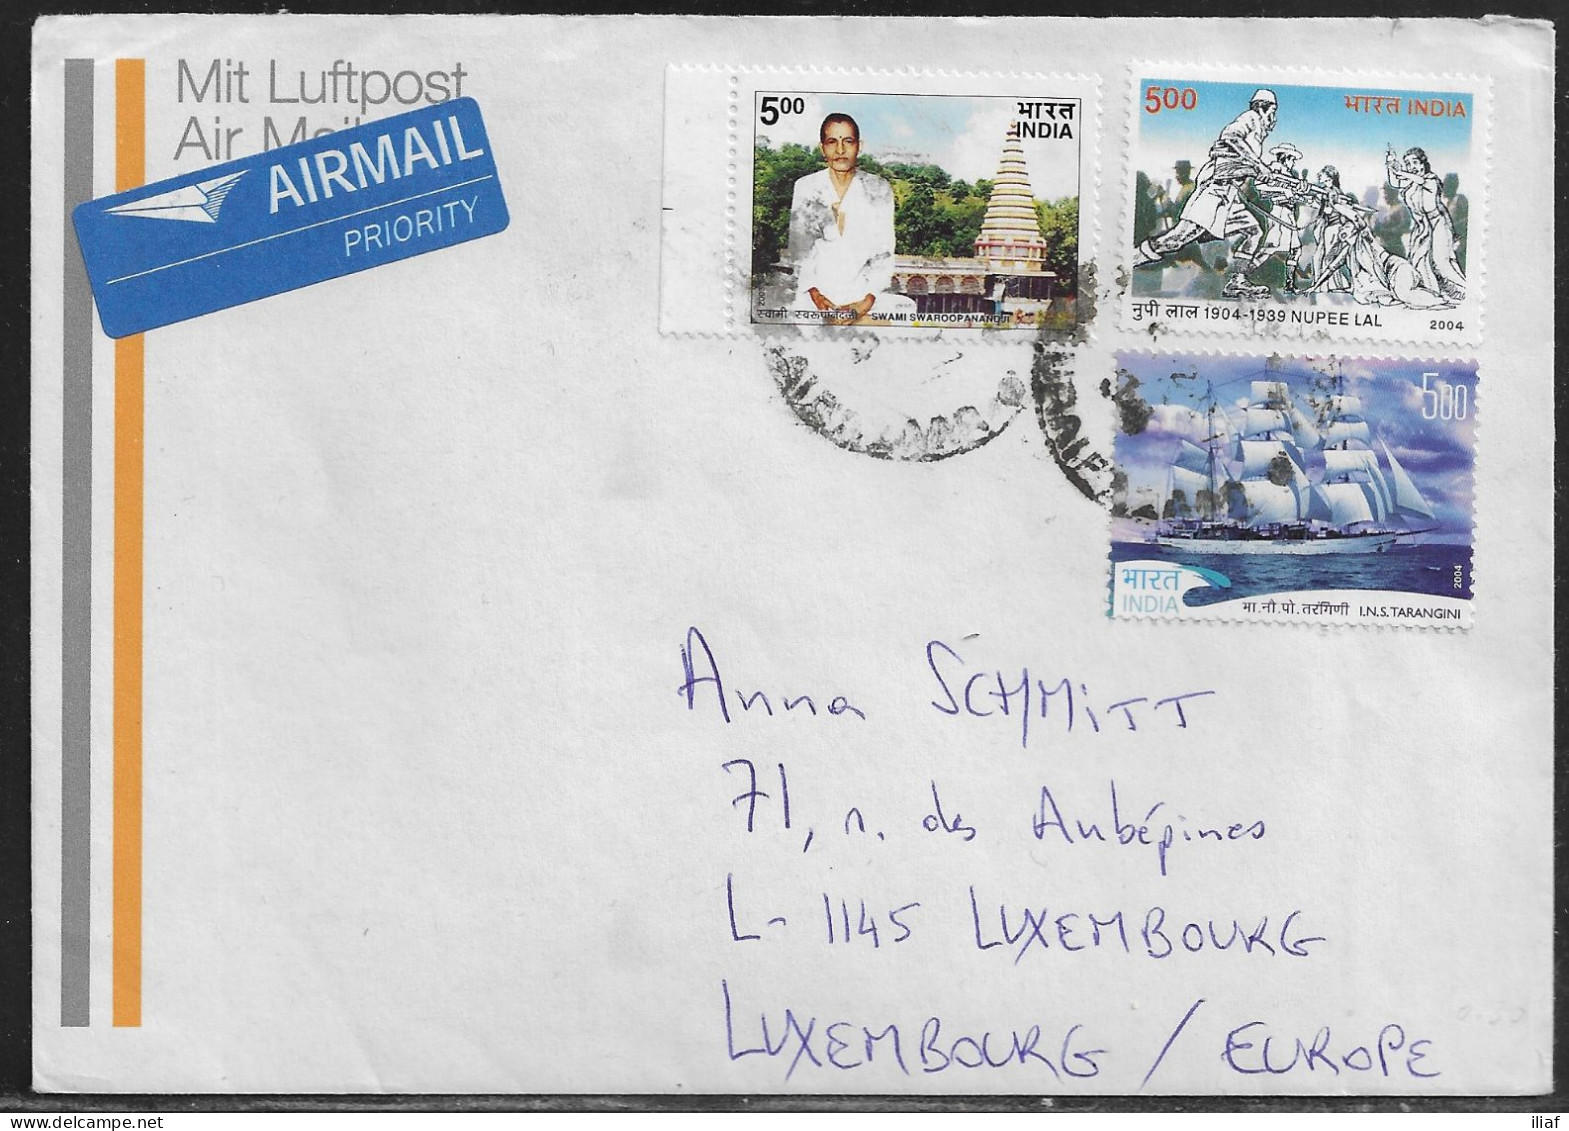 India. Stamps Sc. 2045, 2091, 2059 On Air Mail Letter, Sent To Luxembourg. - Covers & Documents